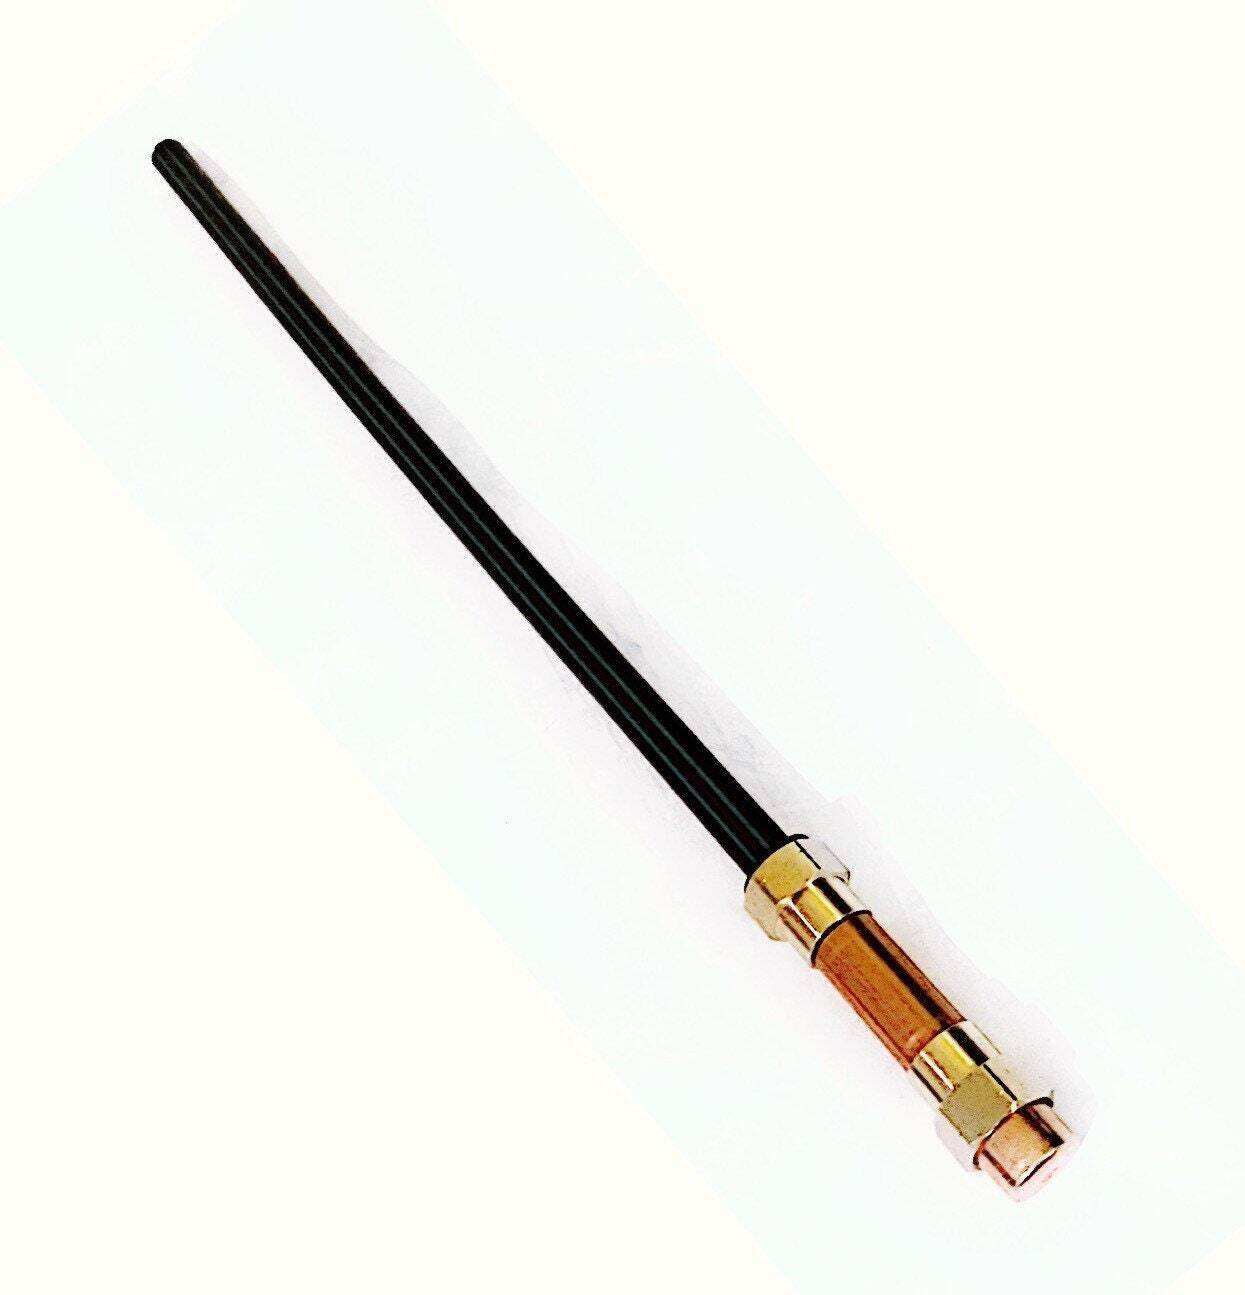 BDSM Hard Flex Rubber Cane Solid Brass and Copper Handle  Gear Impact Play Discipline Flogger